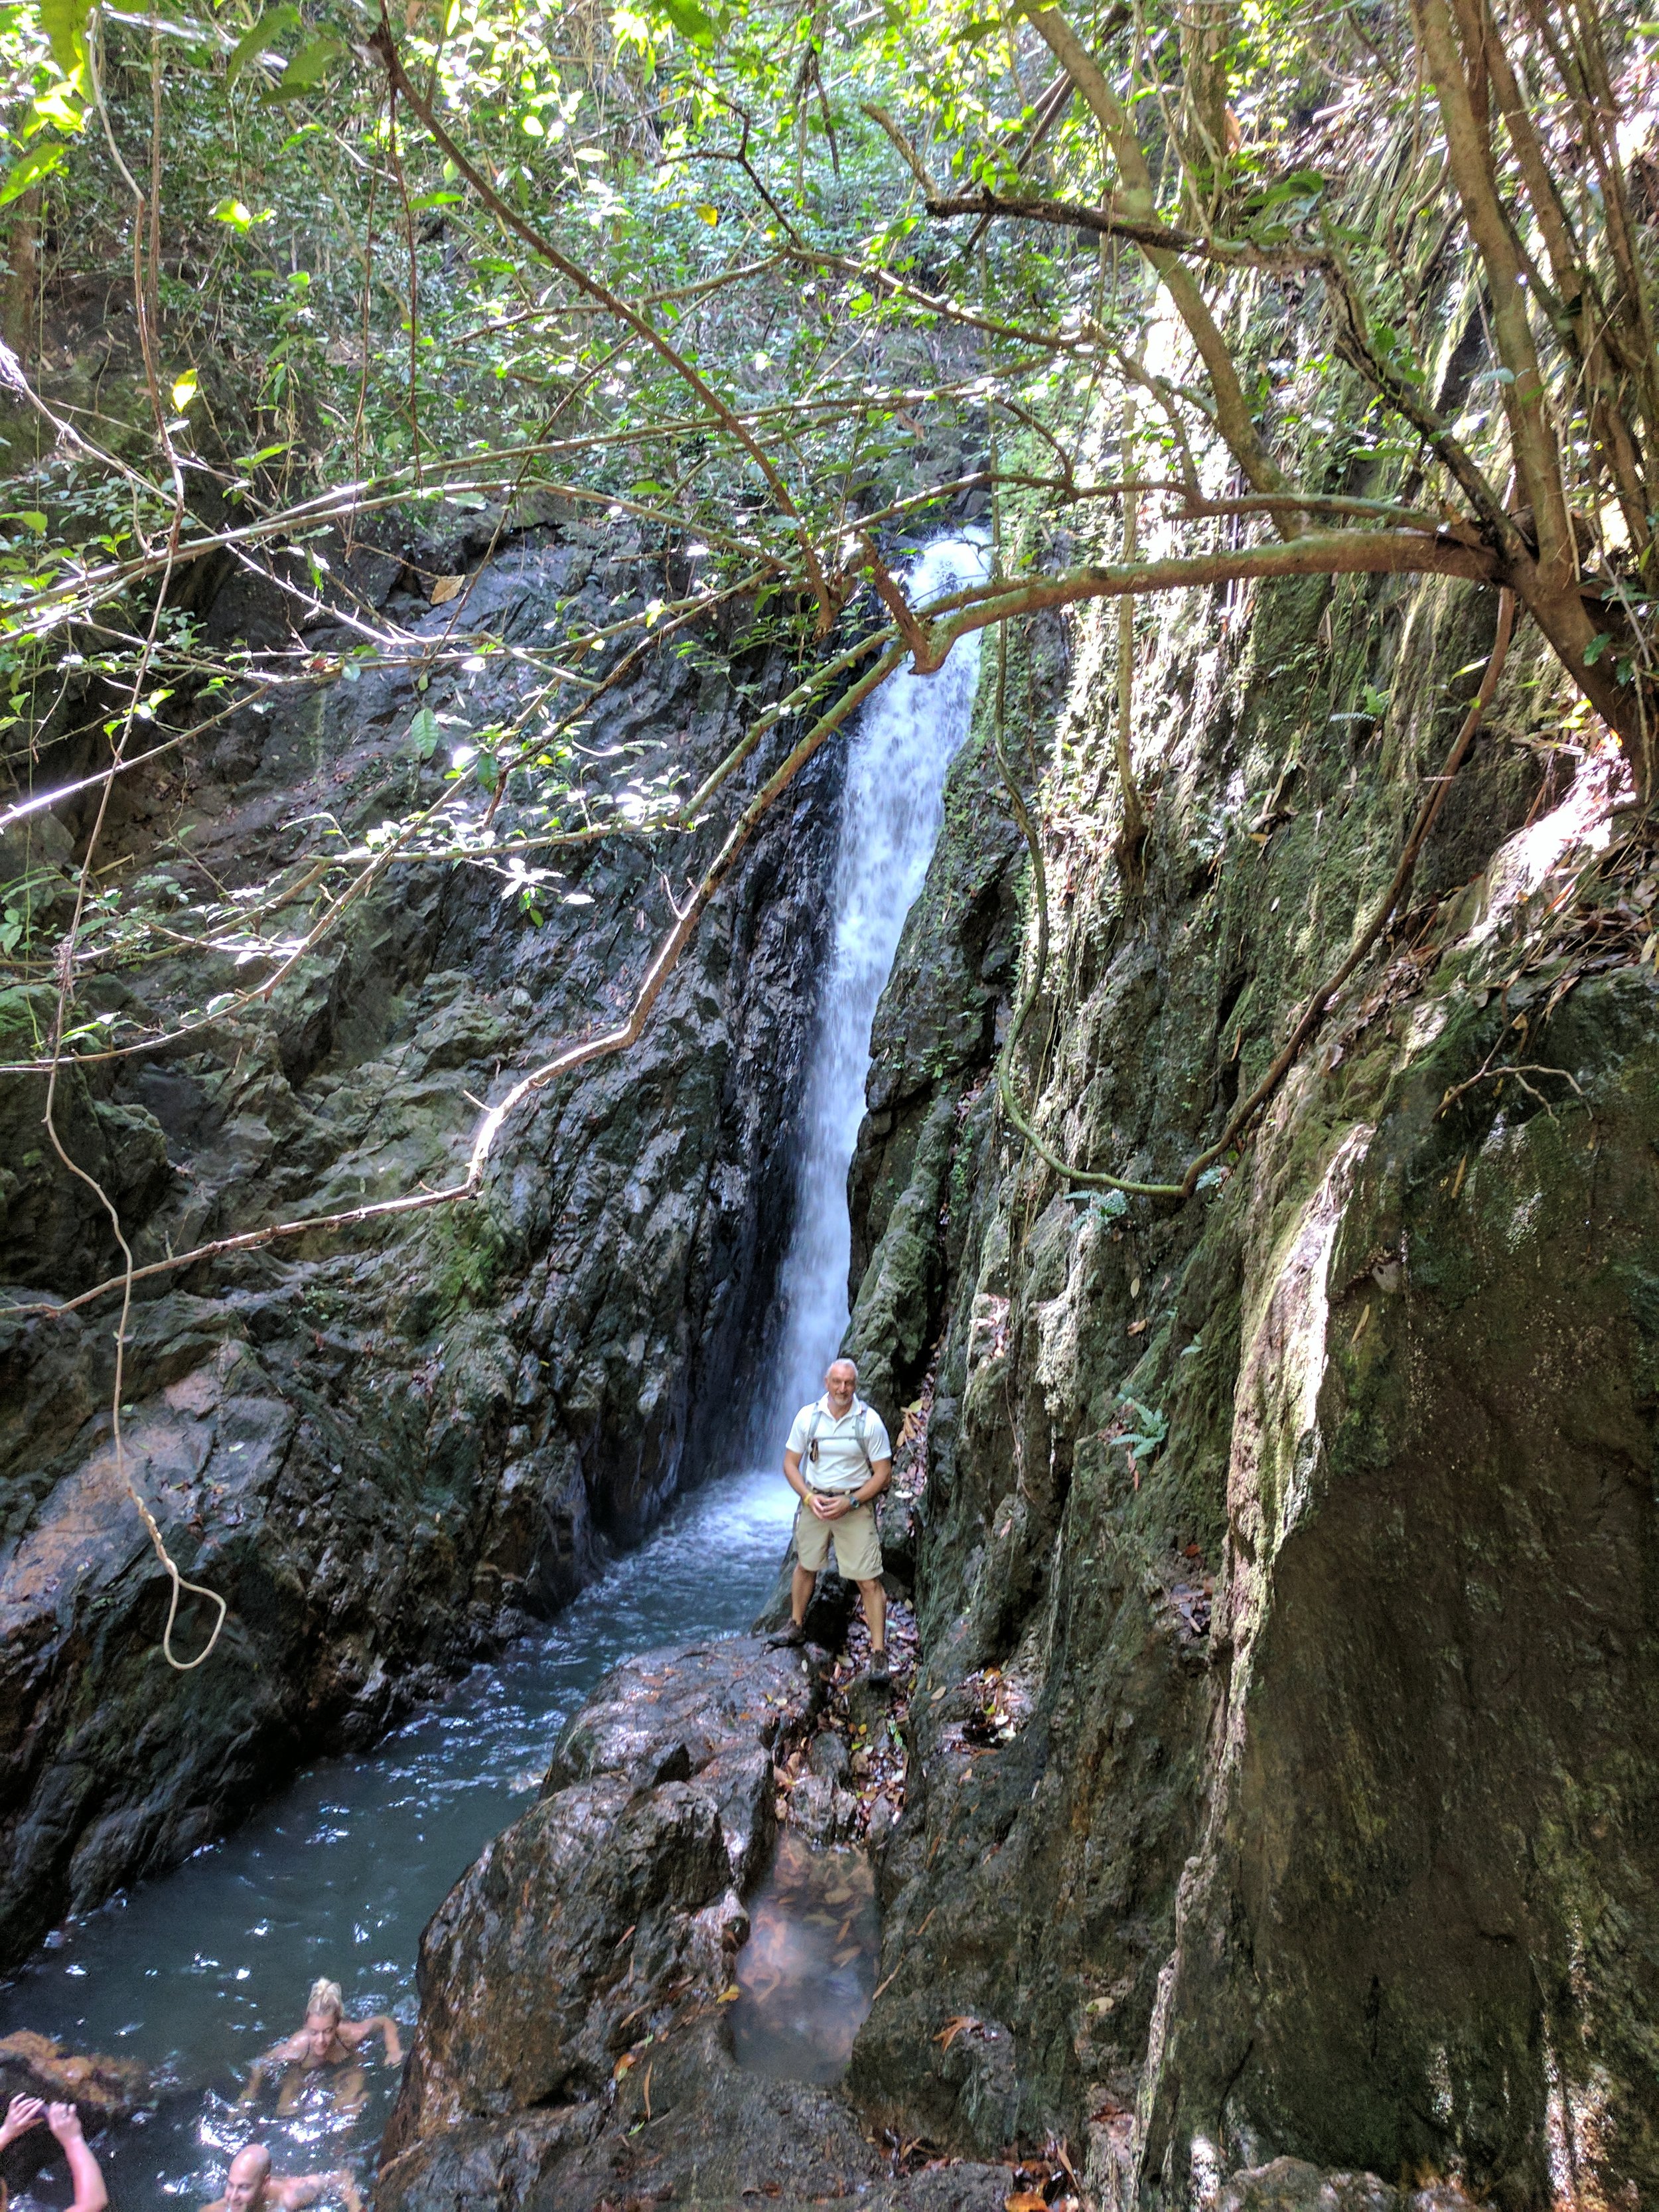 Our last day in Phuket, we strayed from the typical tourist path, as we so often do, and hiked up to a local waterfall. 